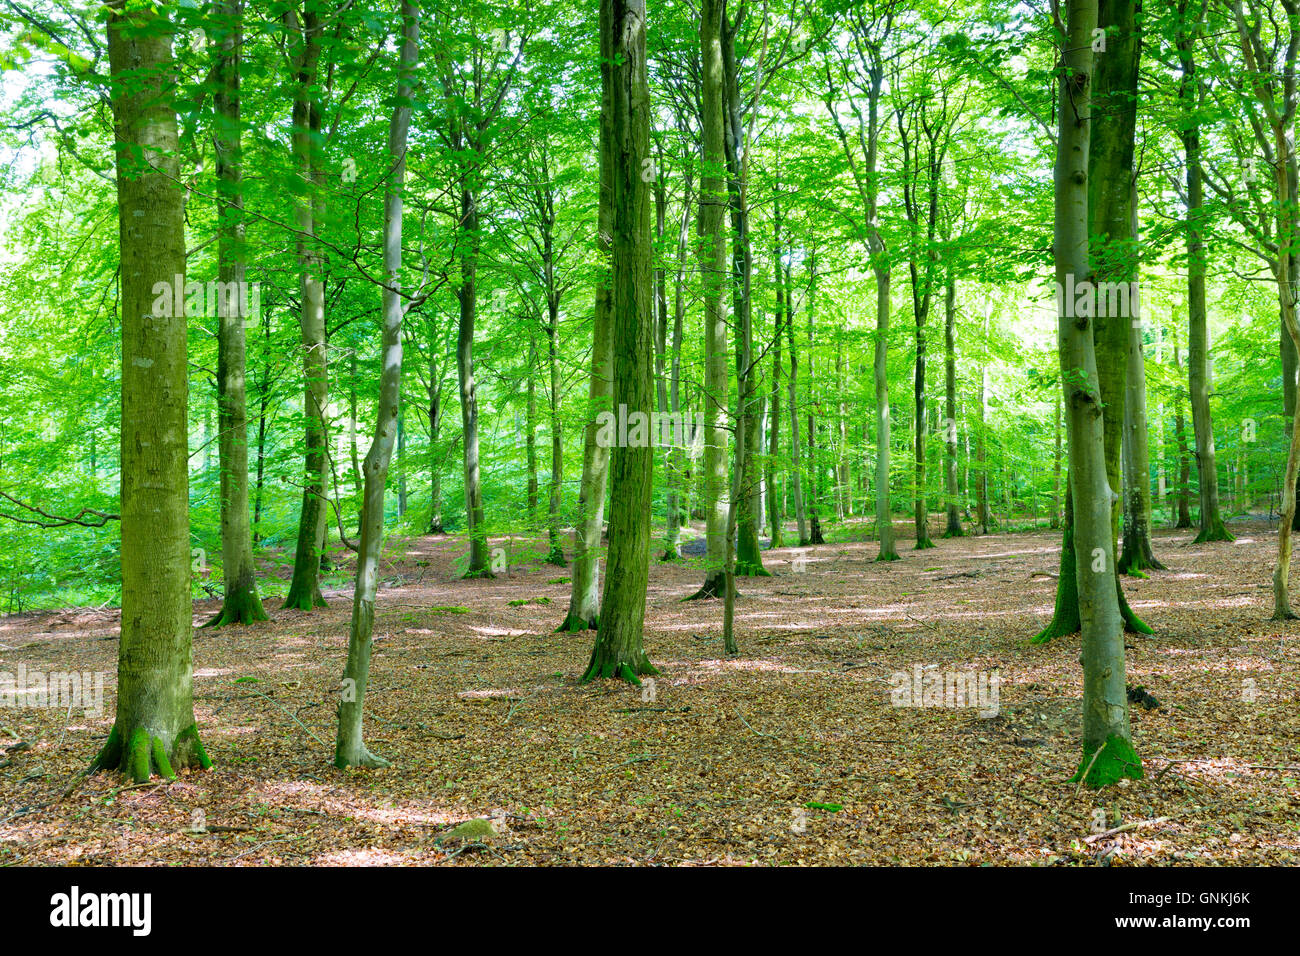 Picturesque woodland scene and ancient forest of tall trees in Denmark Stock Photo